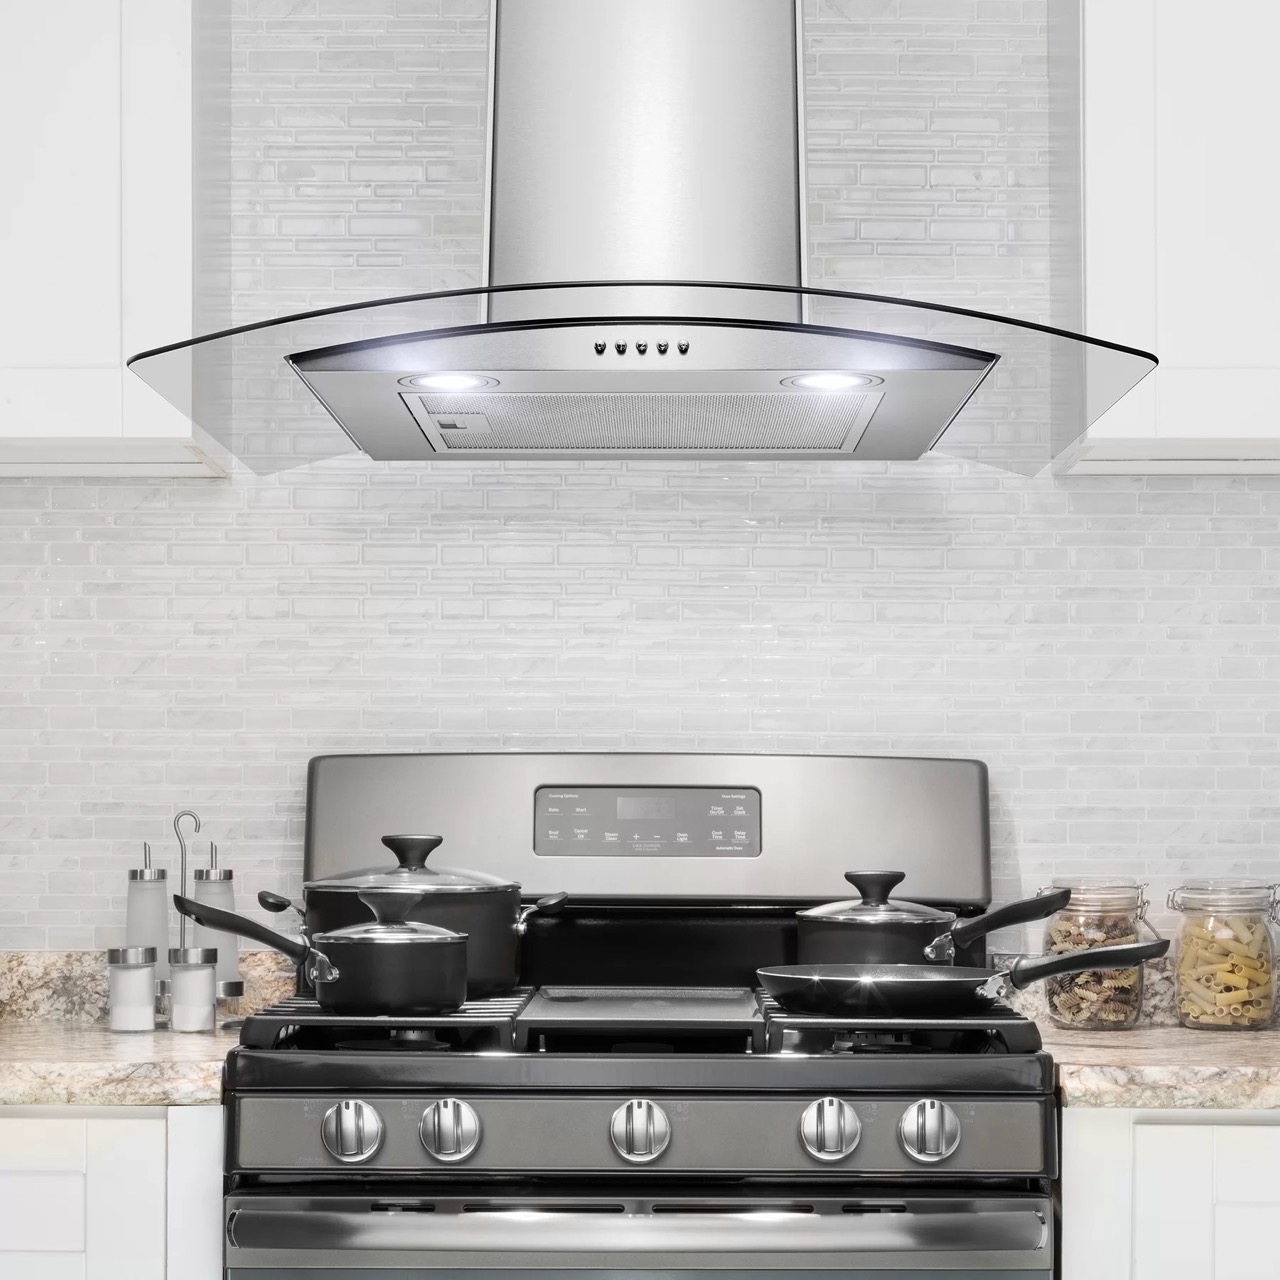 Which Range Hood Is the Quietest?